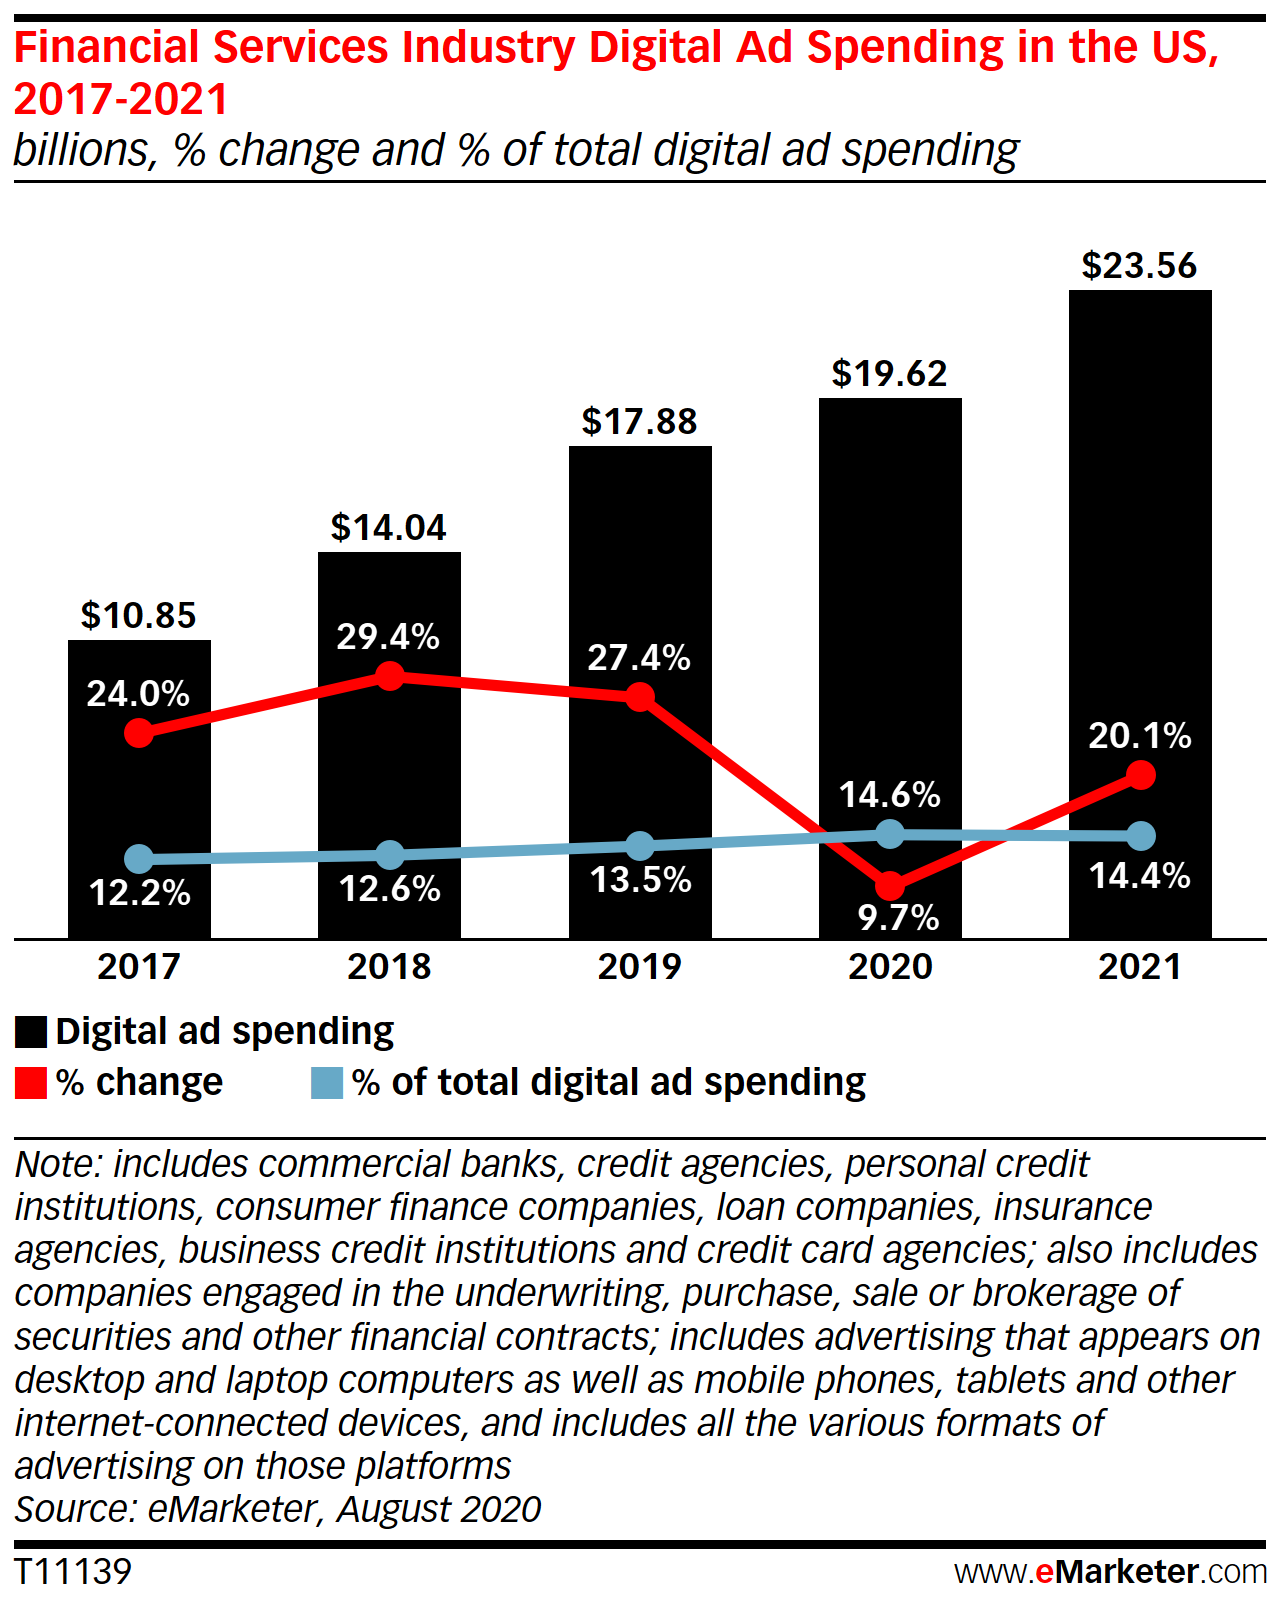 Financial Services Industry Digital Ad Spending in the US, 2017-2021 (billions, % change and % of total digital ad spending)